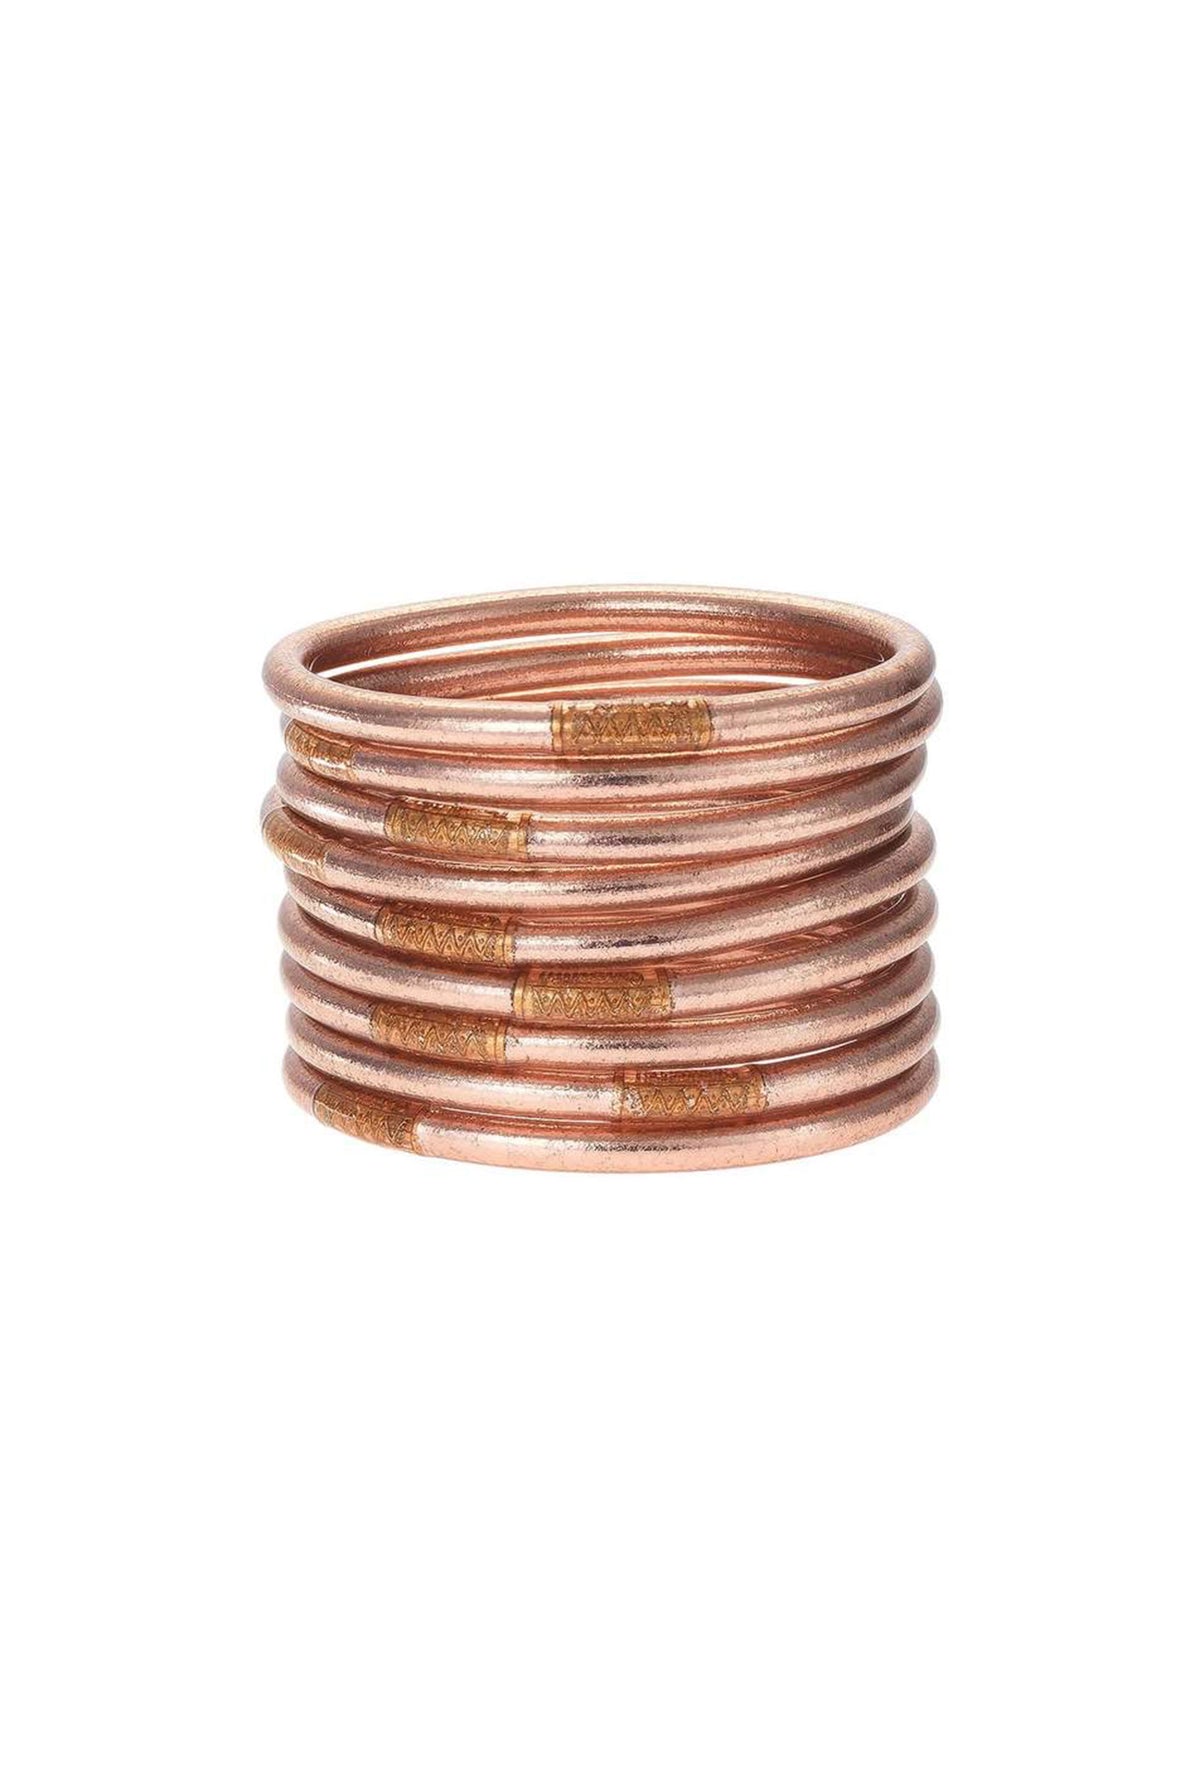 BUDHAGIRL Bangles in Rose Gold | Groovy's